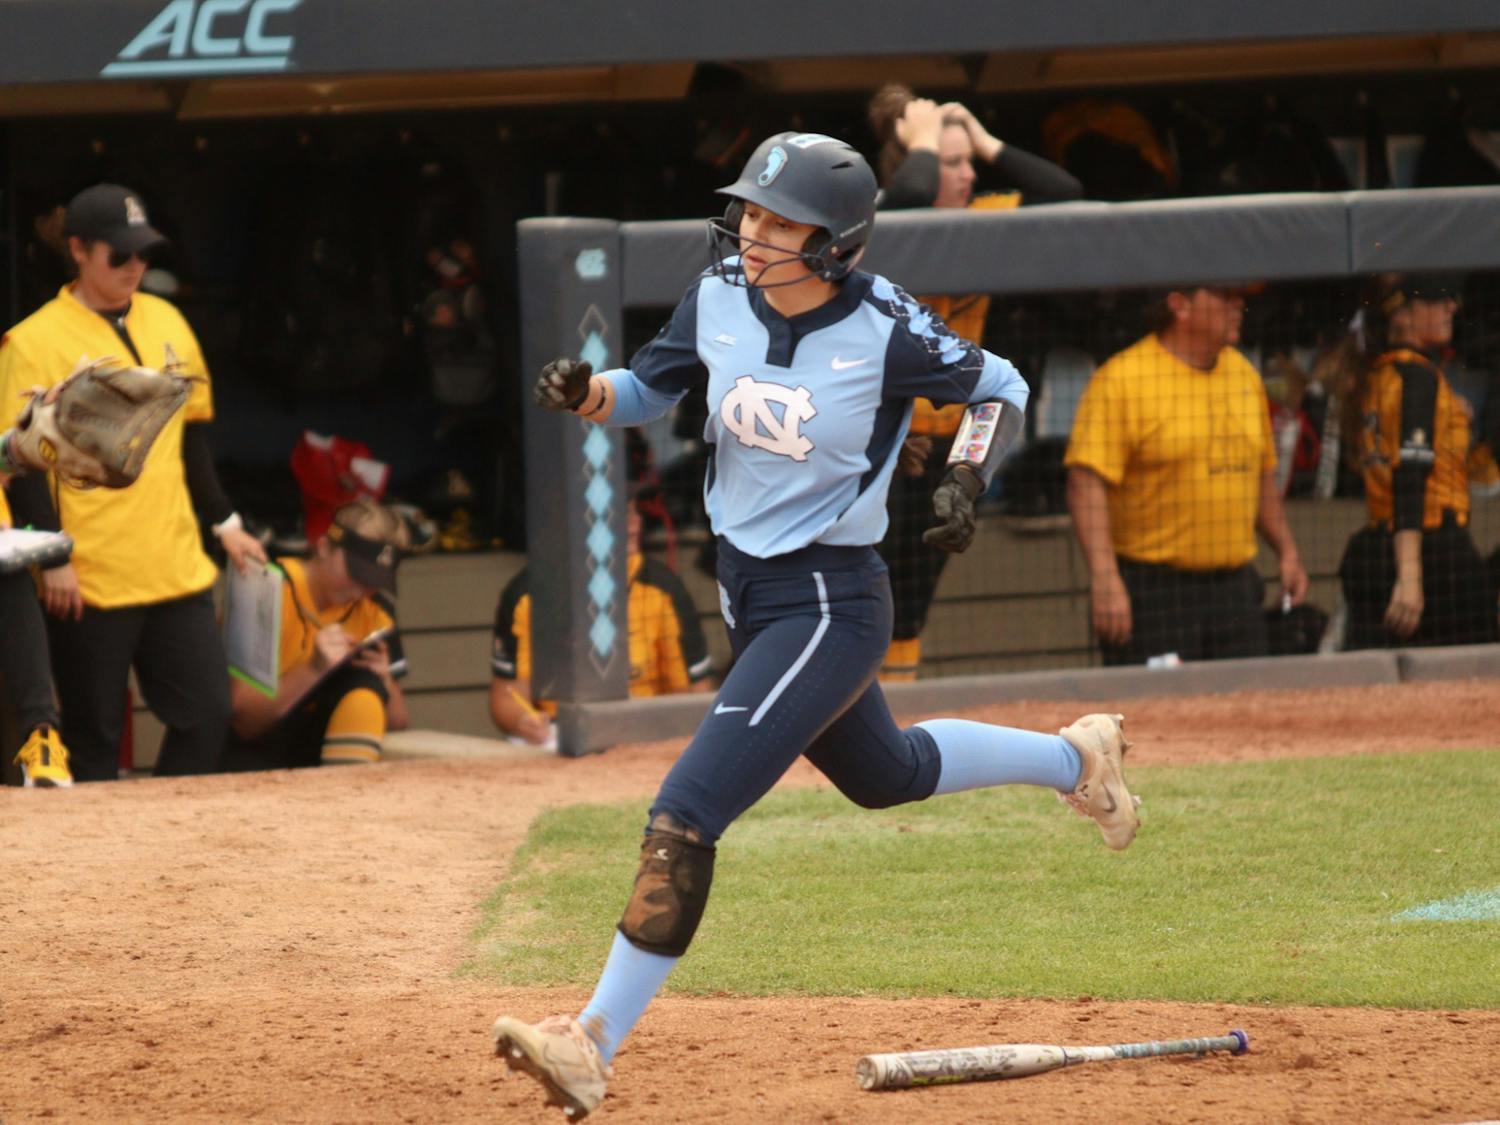 Outfielder Bri Stubbs (27) runs safely to home base, scoring a run for UNC. UNC softball defeated Appalachian State 8-4 at home on Wednesday, March 30, 2022.